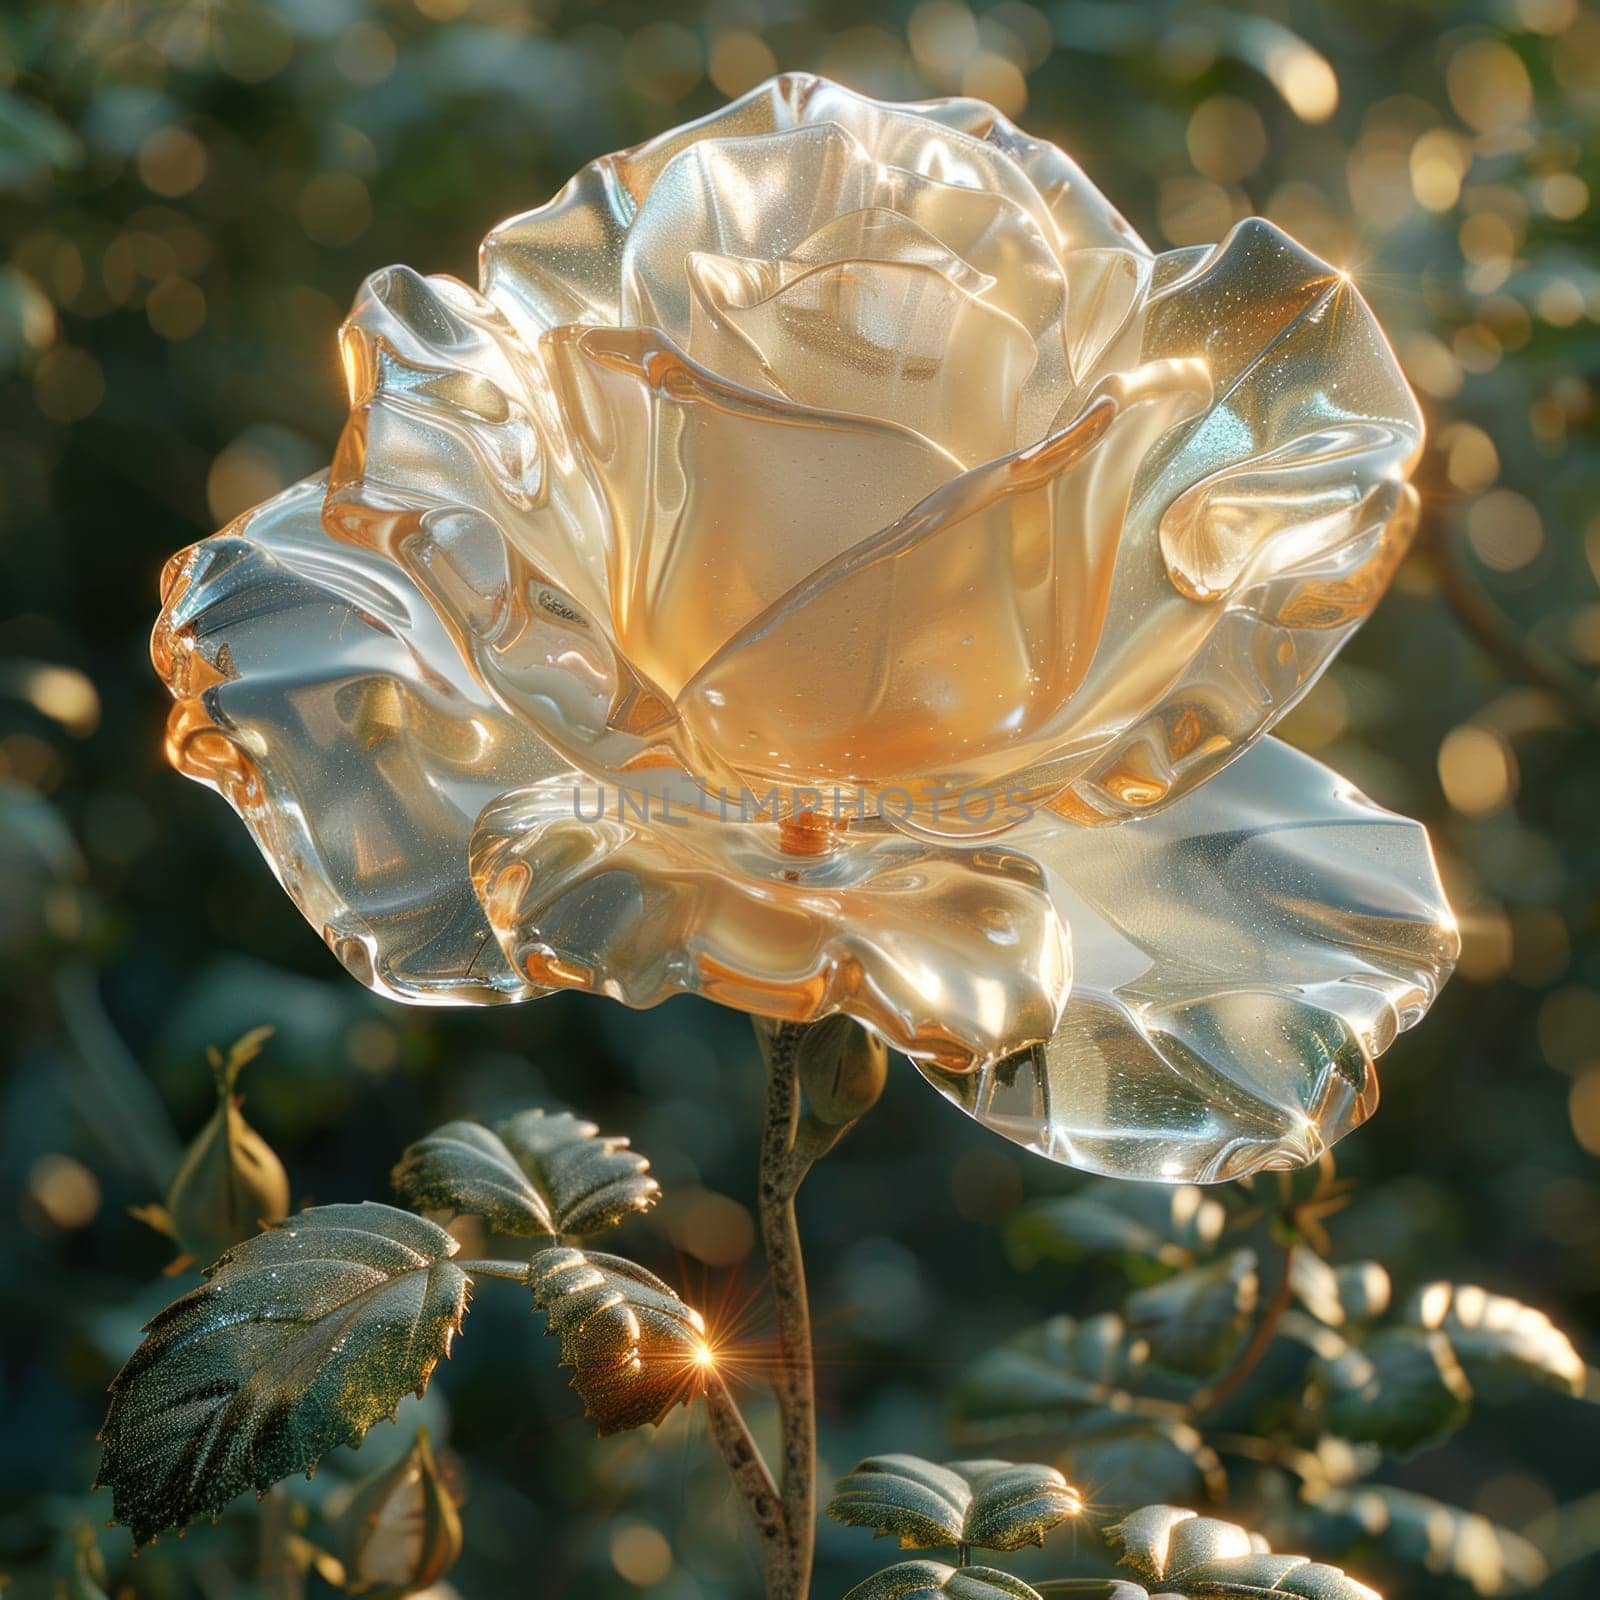 A detailed view of a rose flower with a soft focus background, showcasing its delicate petals and intricate details.